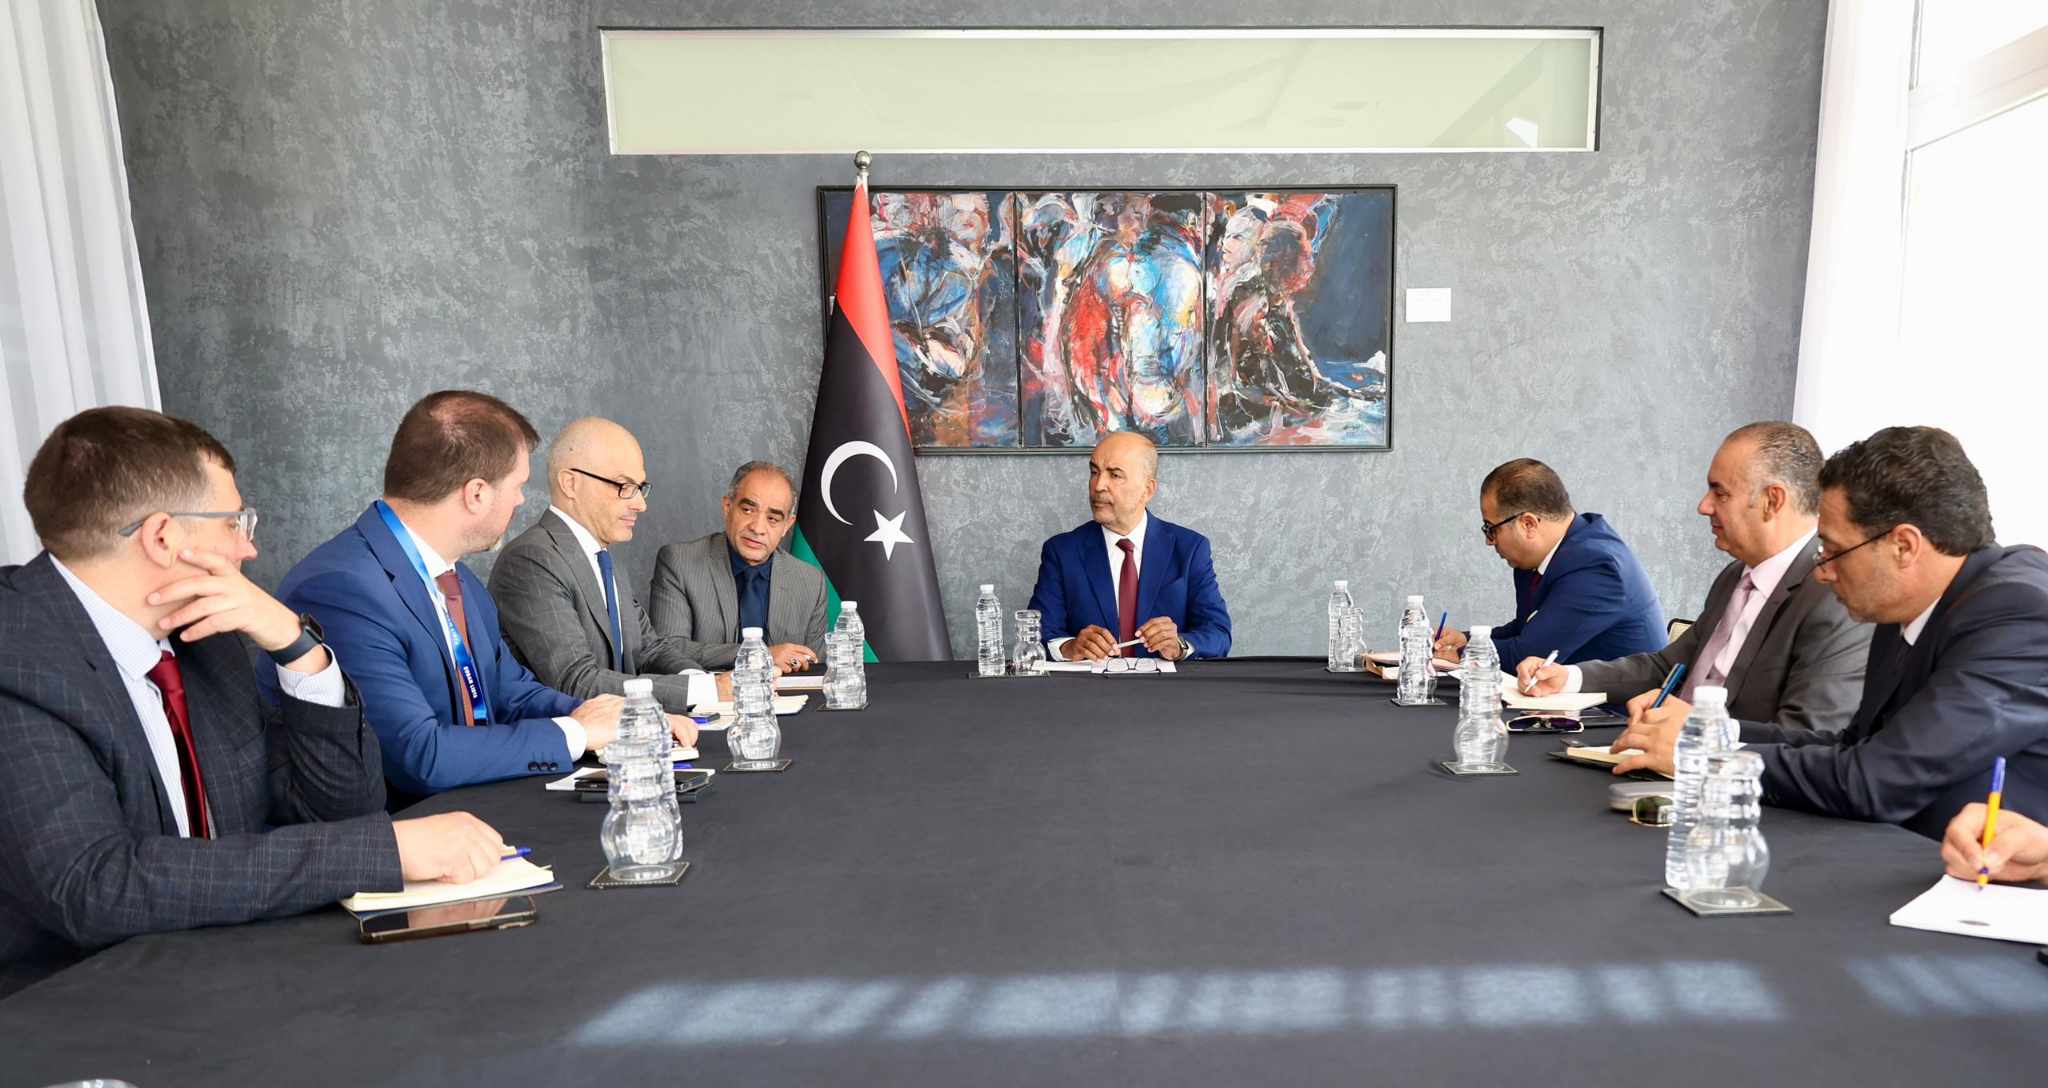 (Al-Koni) discusses with the European Union Ambassador aspects of joint and direct cooperation between Libya and the European Union in various fields.